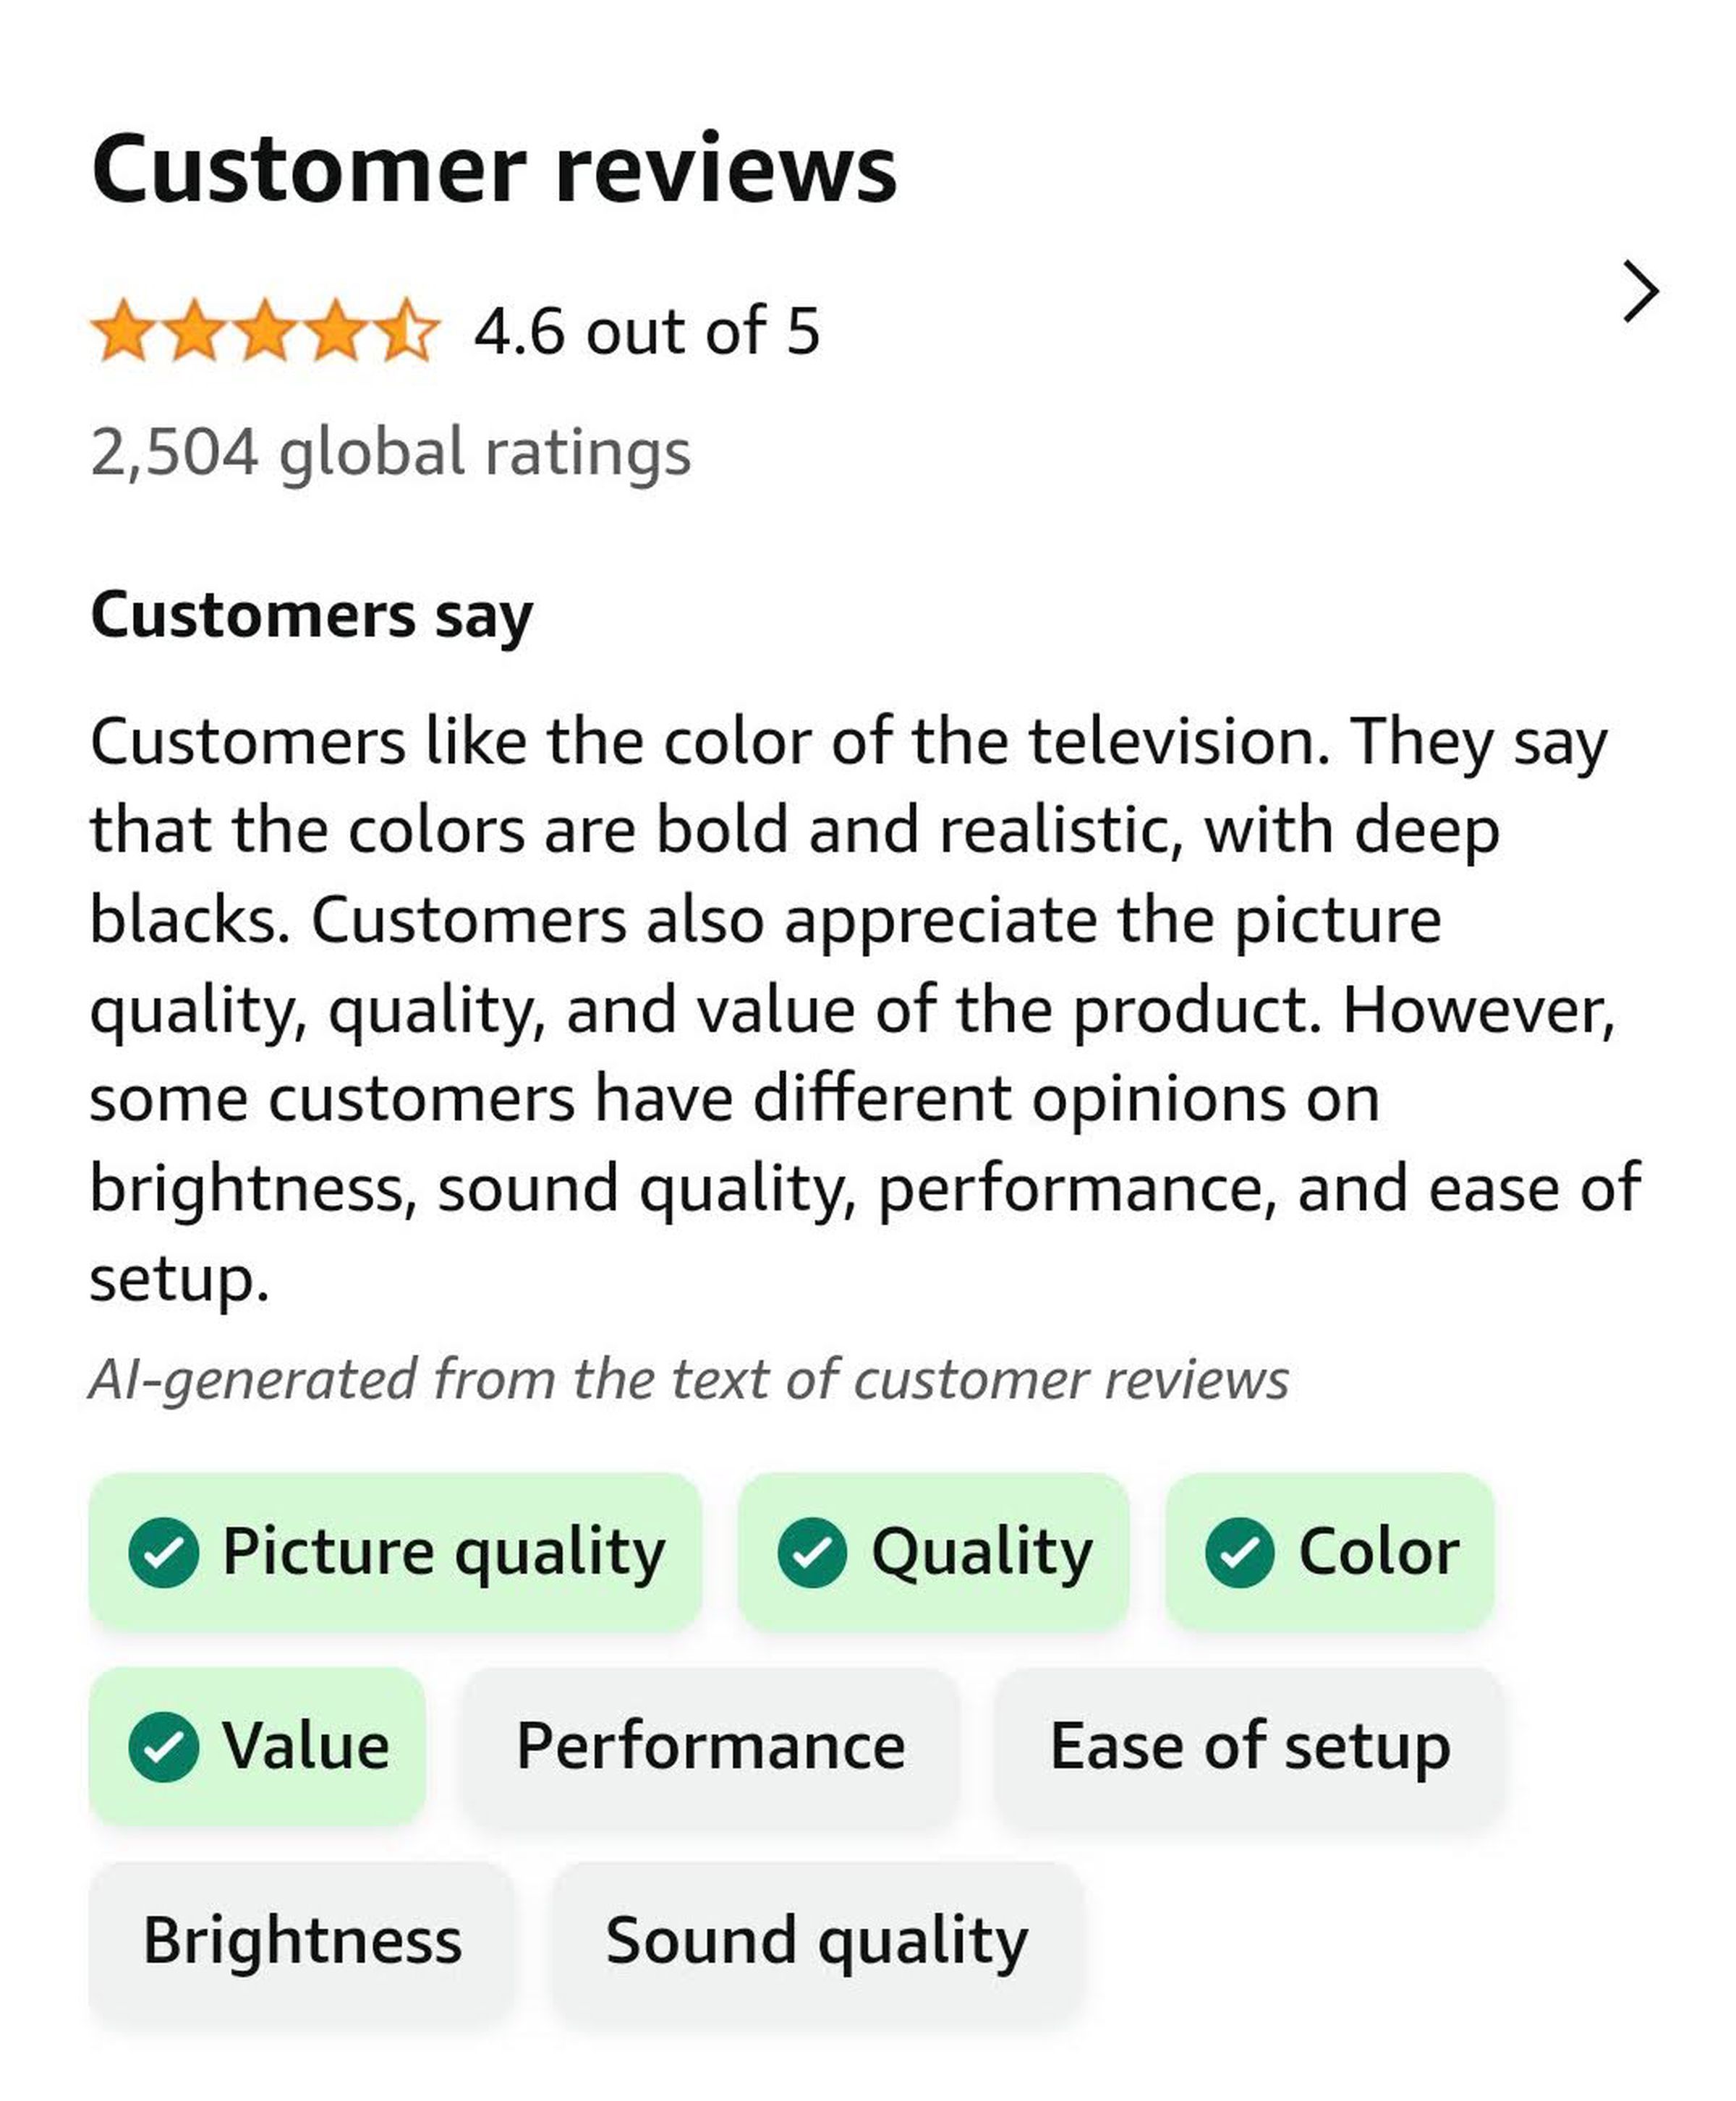 “Customers like the color of the television. They say that the colors are bold and realistic, with deep blacks. Customers also appreciate the picture quality, quality, and value of the product. However, some customers have different opinions on brightness, sound quality, performance, and ease of setup.”